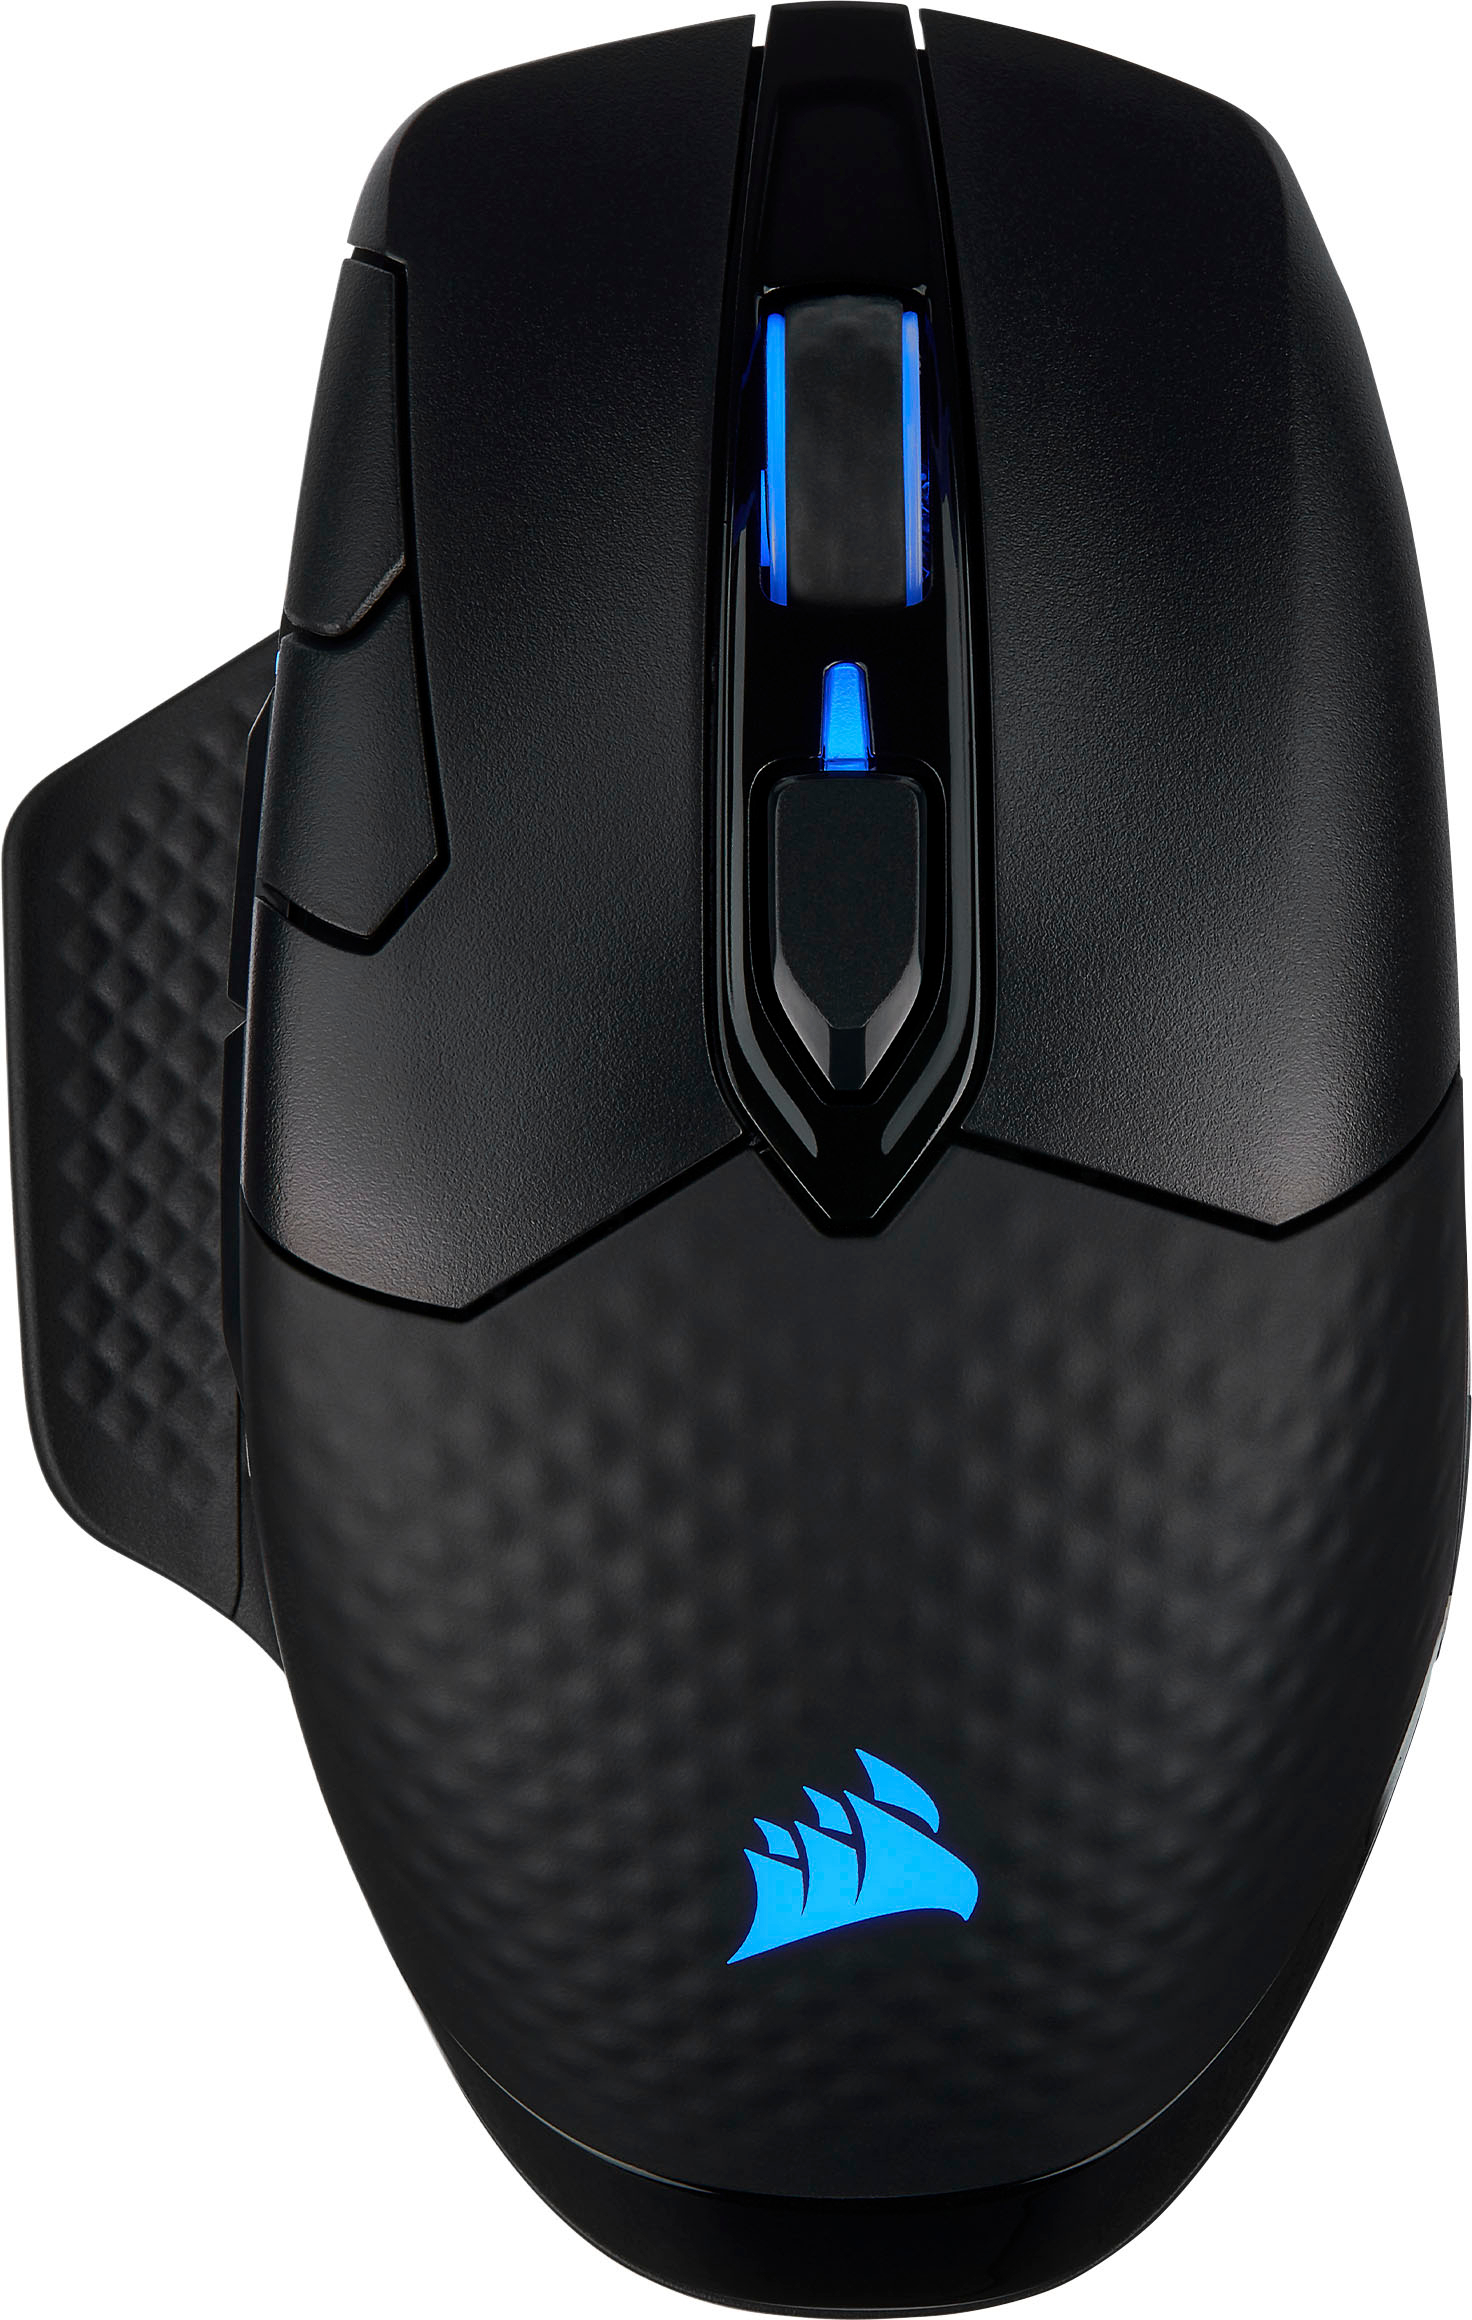 Back View: CORSAIR - HARPOON RGB Wireless Optical Gaming Mouse with Bluetooth - Black